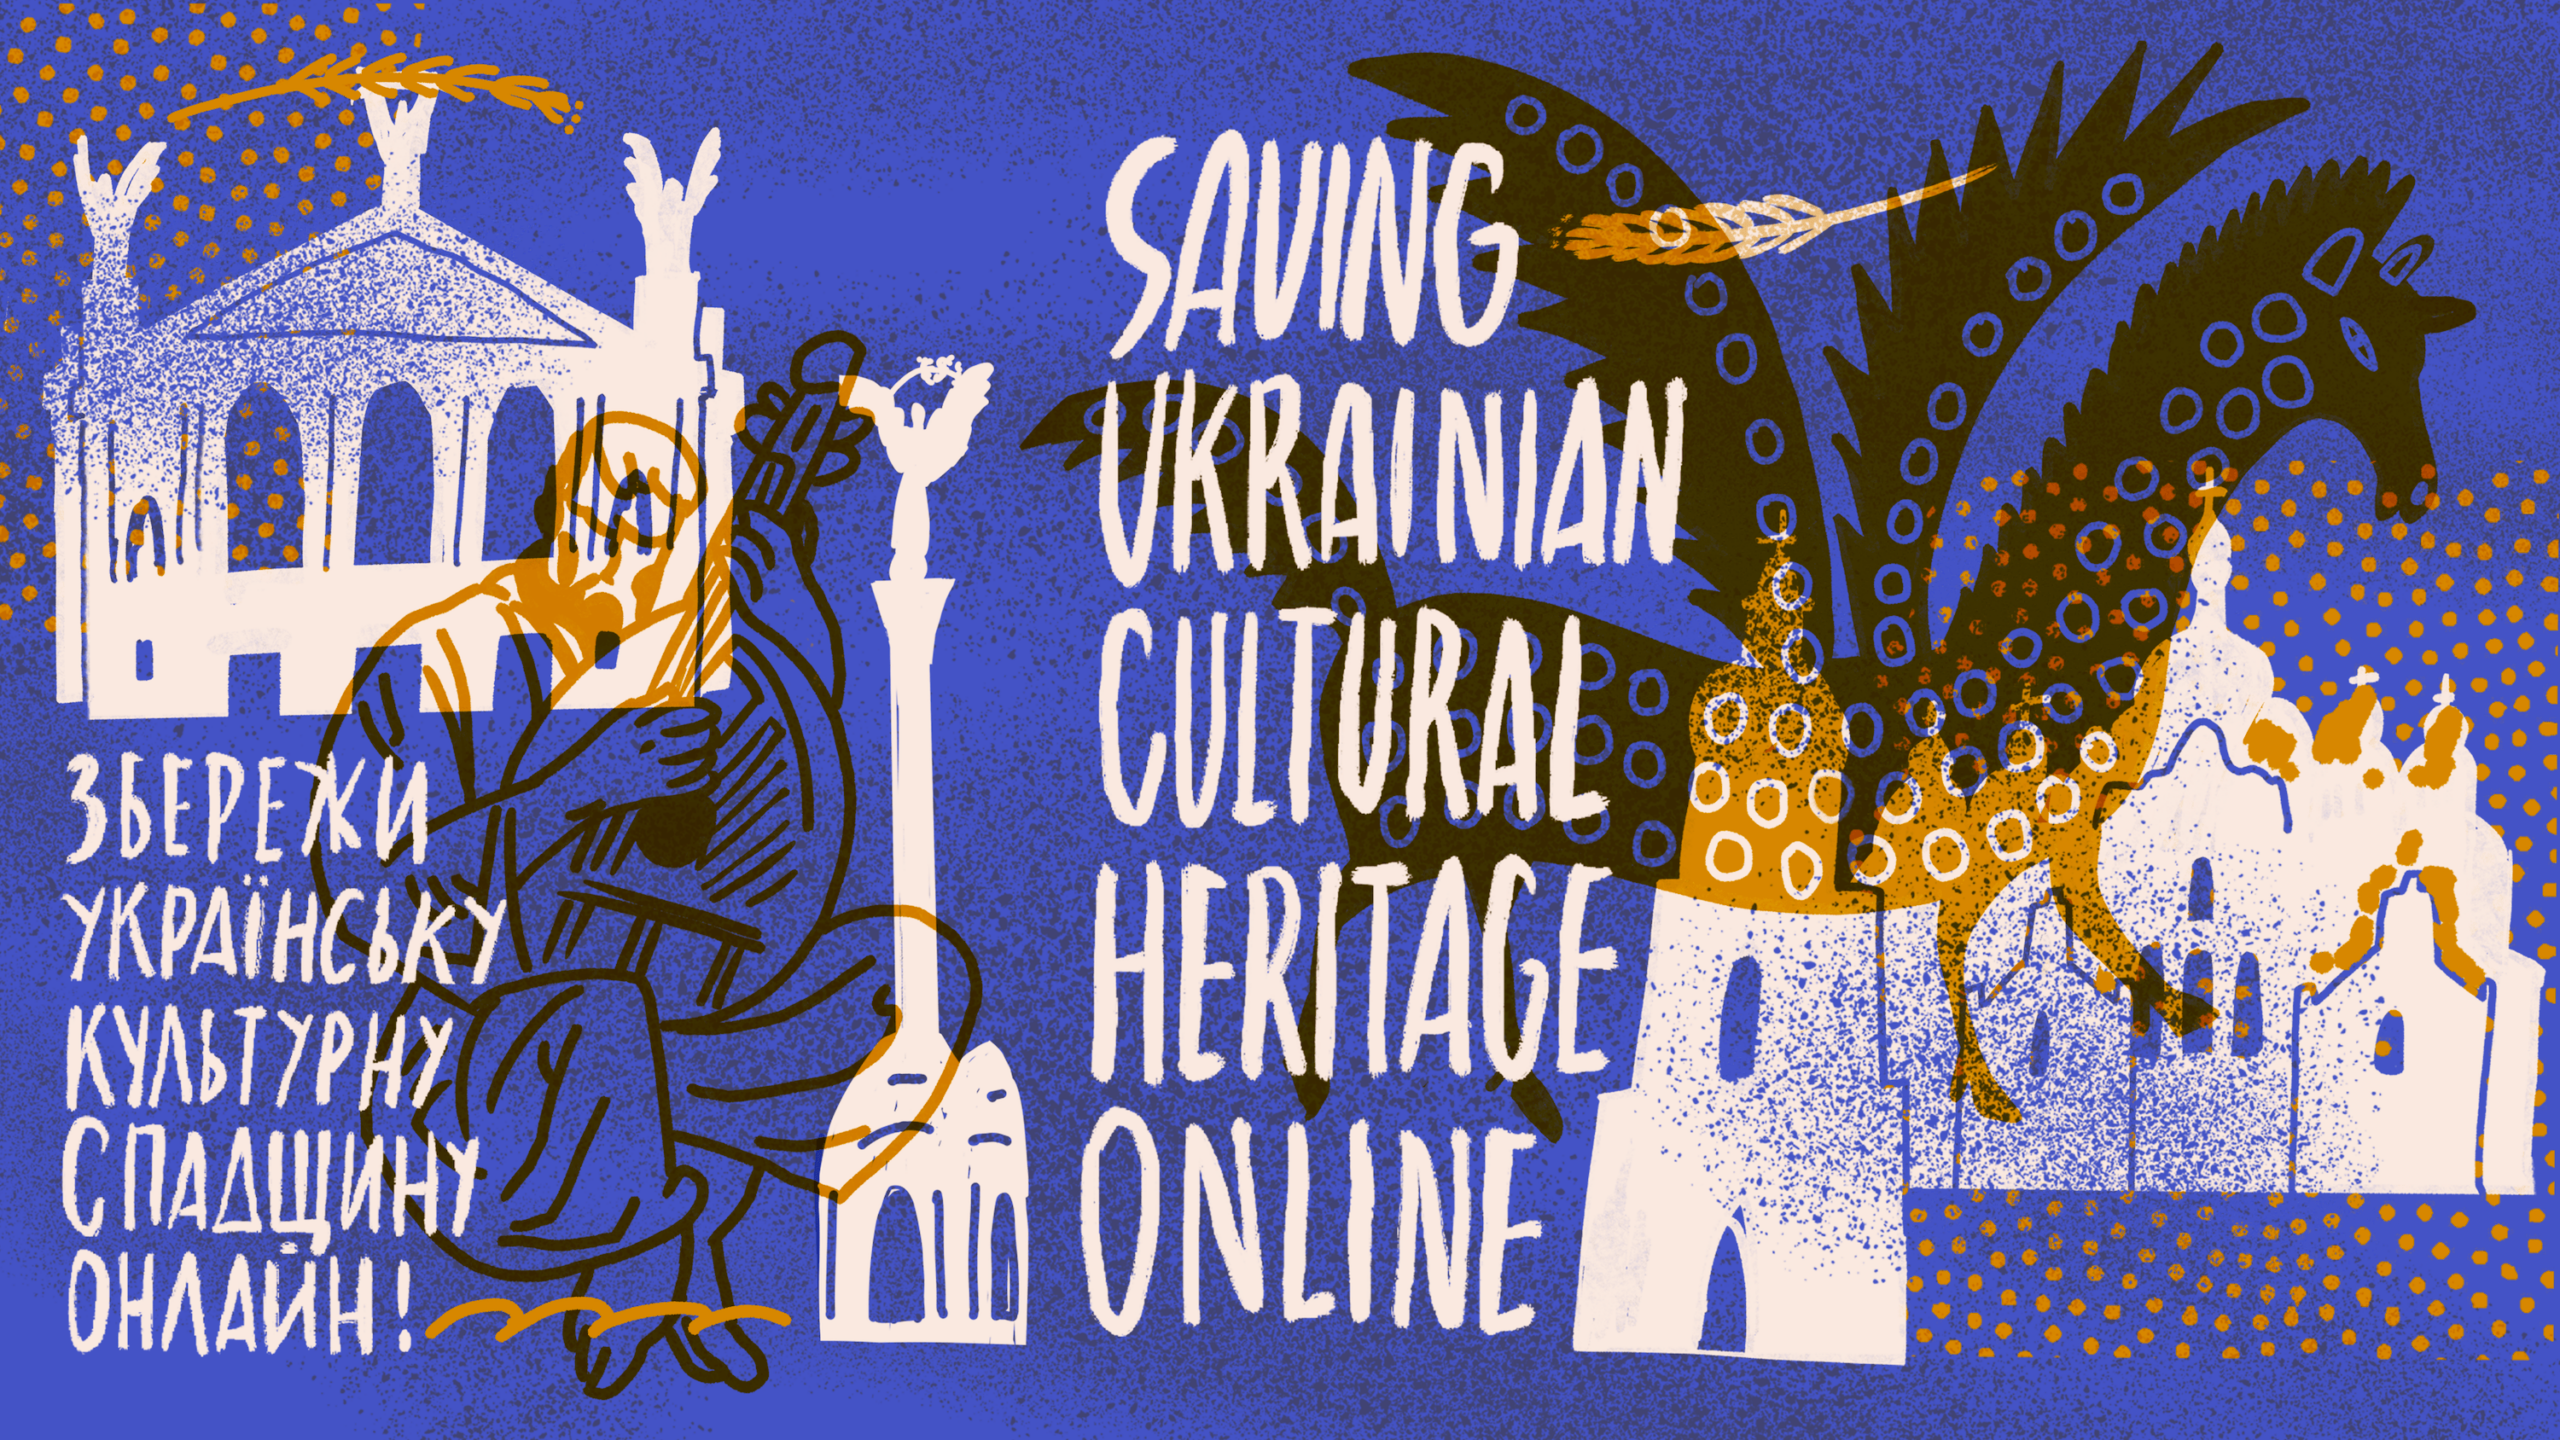 Image : On a Mission to Preserve the Ukrainian Cultural Heritage